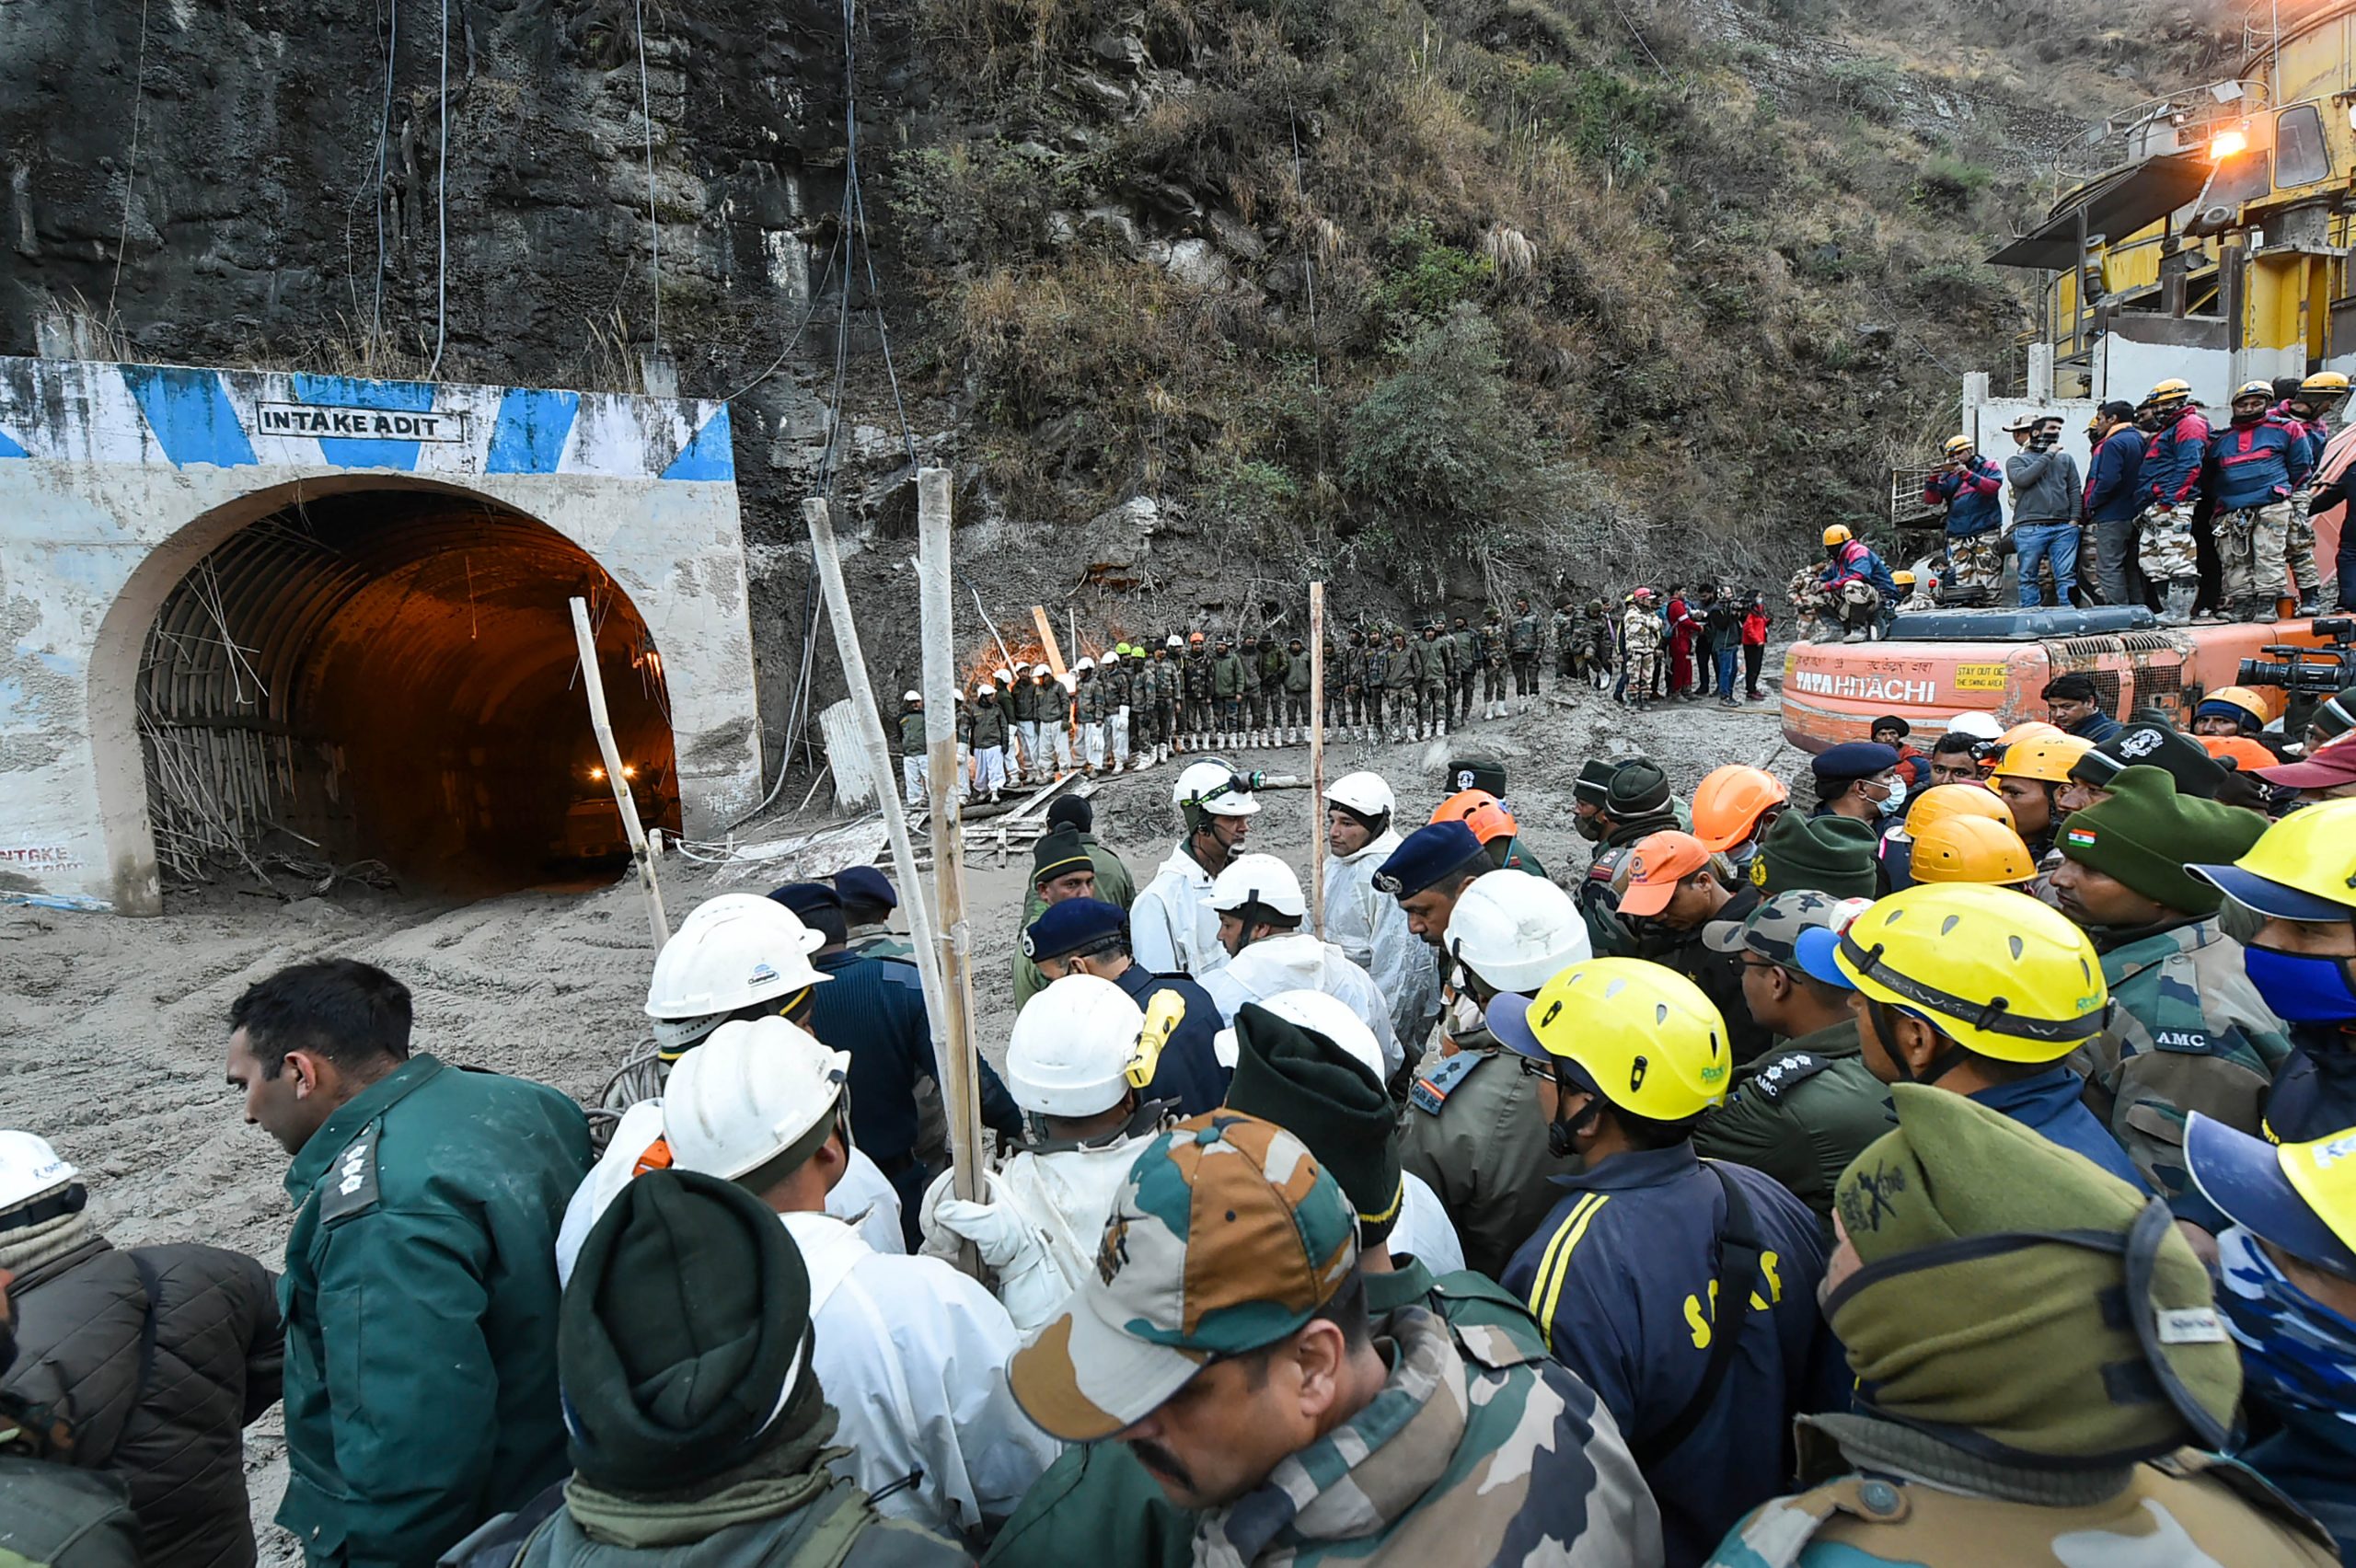 Uttarakhand glacier disaster: Death toll rises to 31, rescue operation underway in Tapovan tunnel